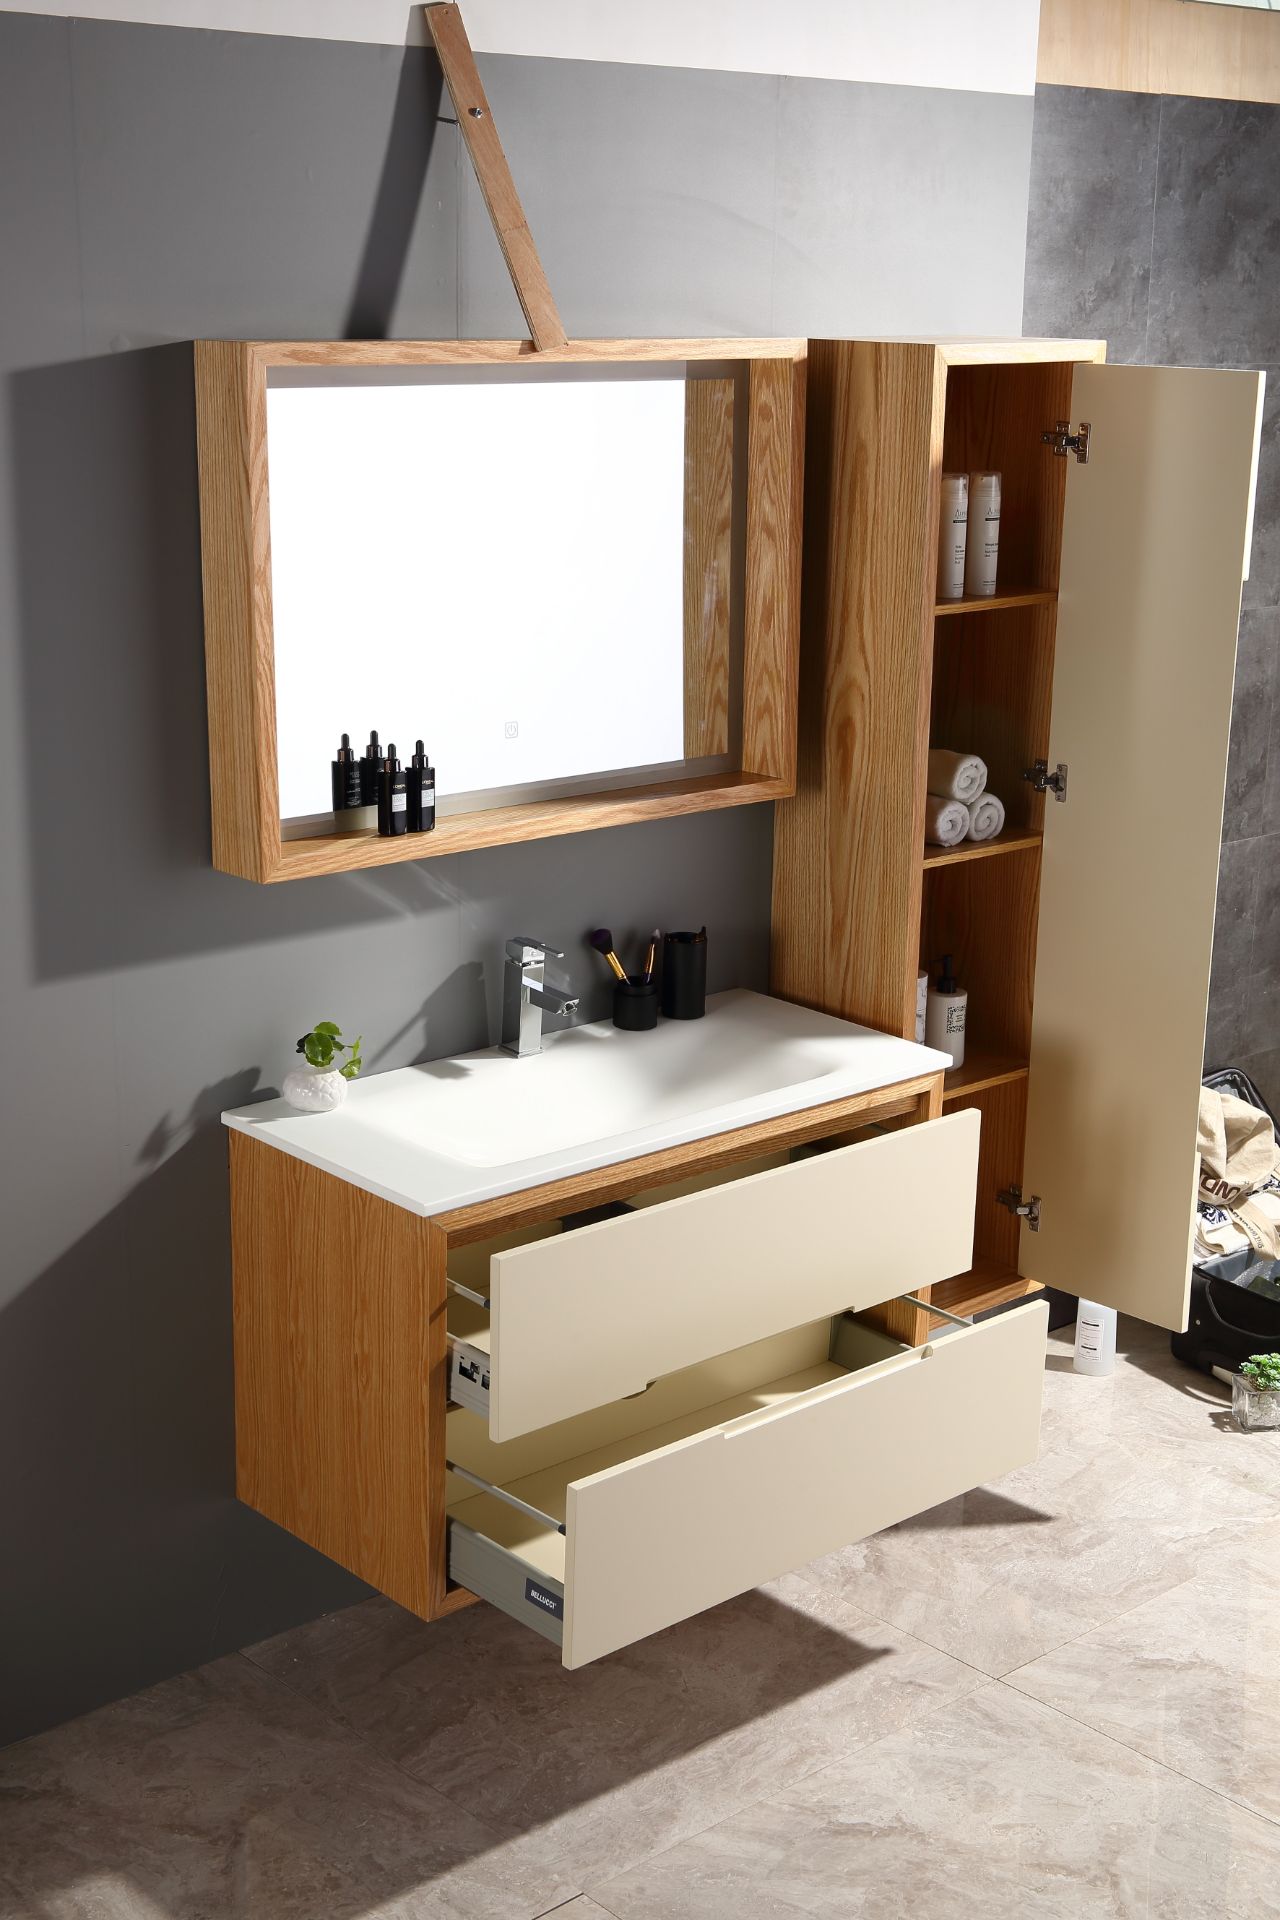 Complete Vanity Unit Set in Beige with fixtures and fittings RRP £799.99 *NO VAT* - Image 2 of 5